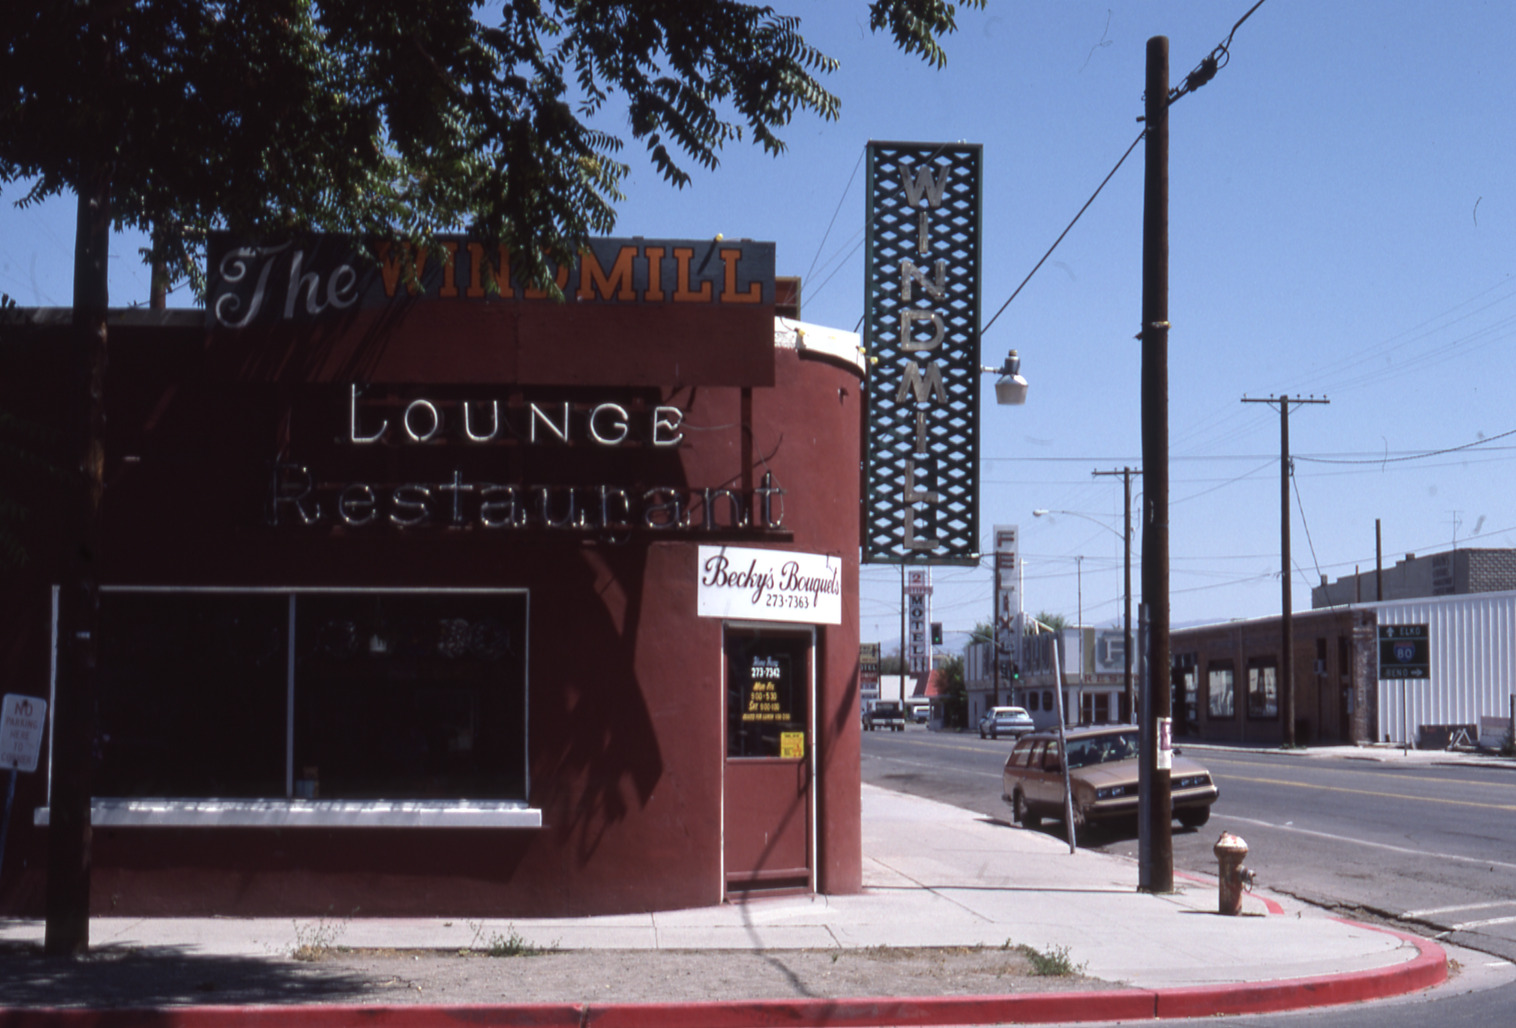 The Windmill Lounge lettering and wall sign, Lovelock, Nevada: photographic print